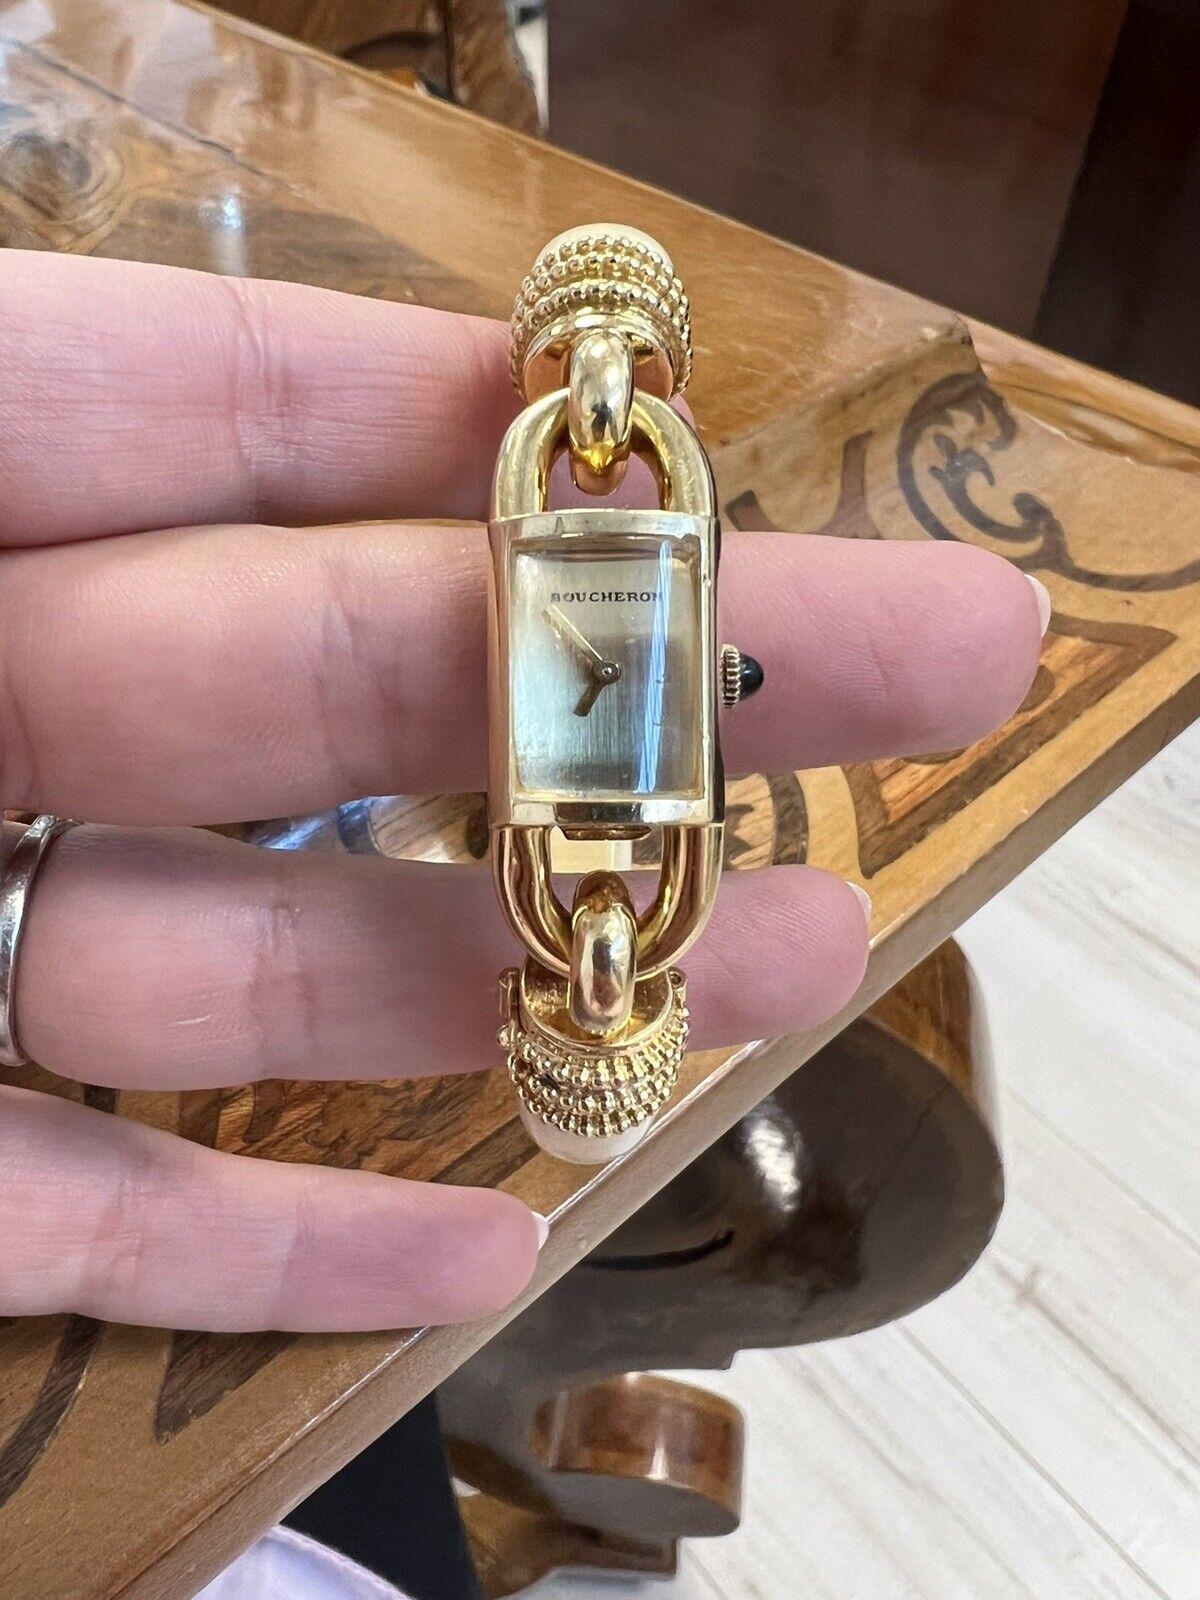 Boucheron Paris 18k Yellow Gold & Bone Manual Watch Bracelet Vintage Fully Hallmarked

Here is your chance to purchase a beautiful and highly collectible designer watch bracelet.  Truly a great piece at a great price! 

This listing is for a vintage